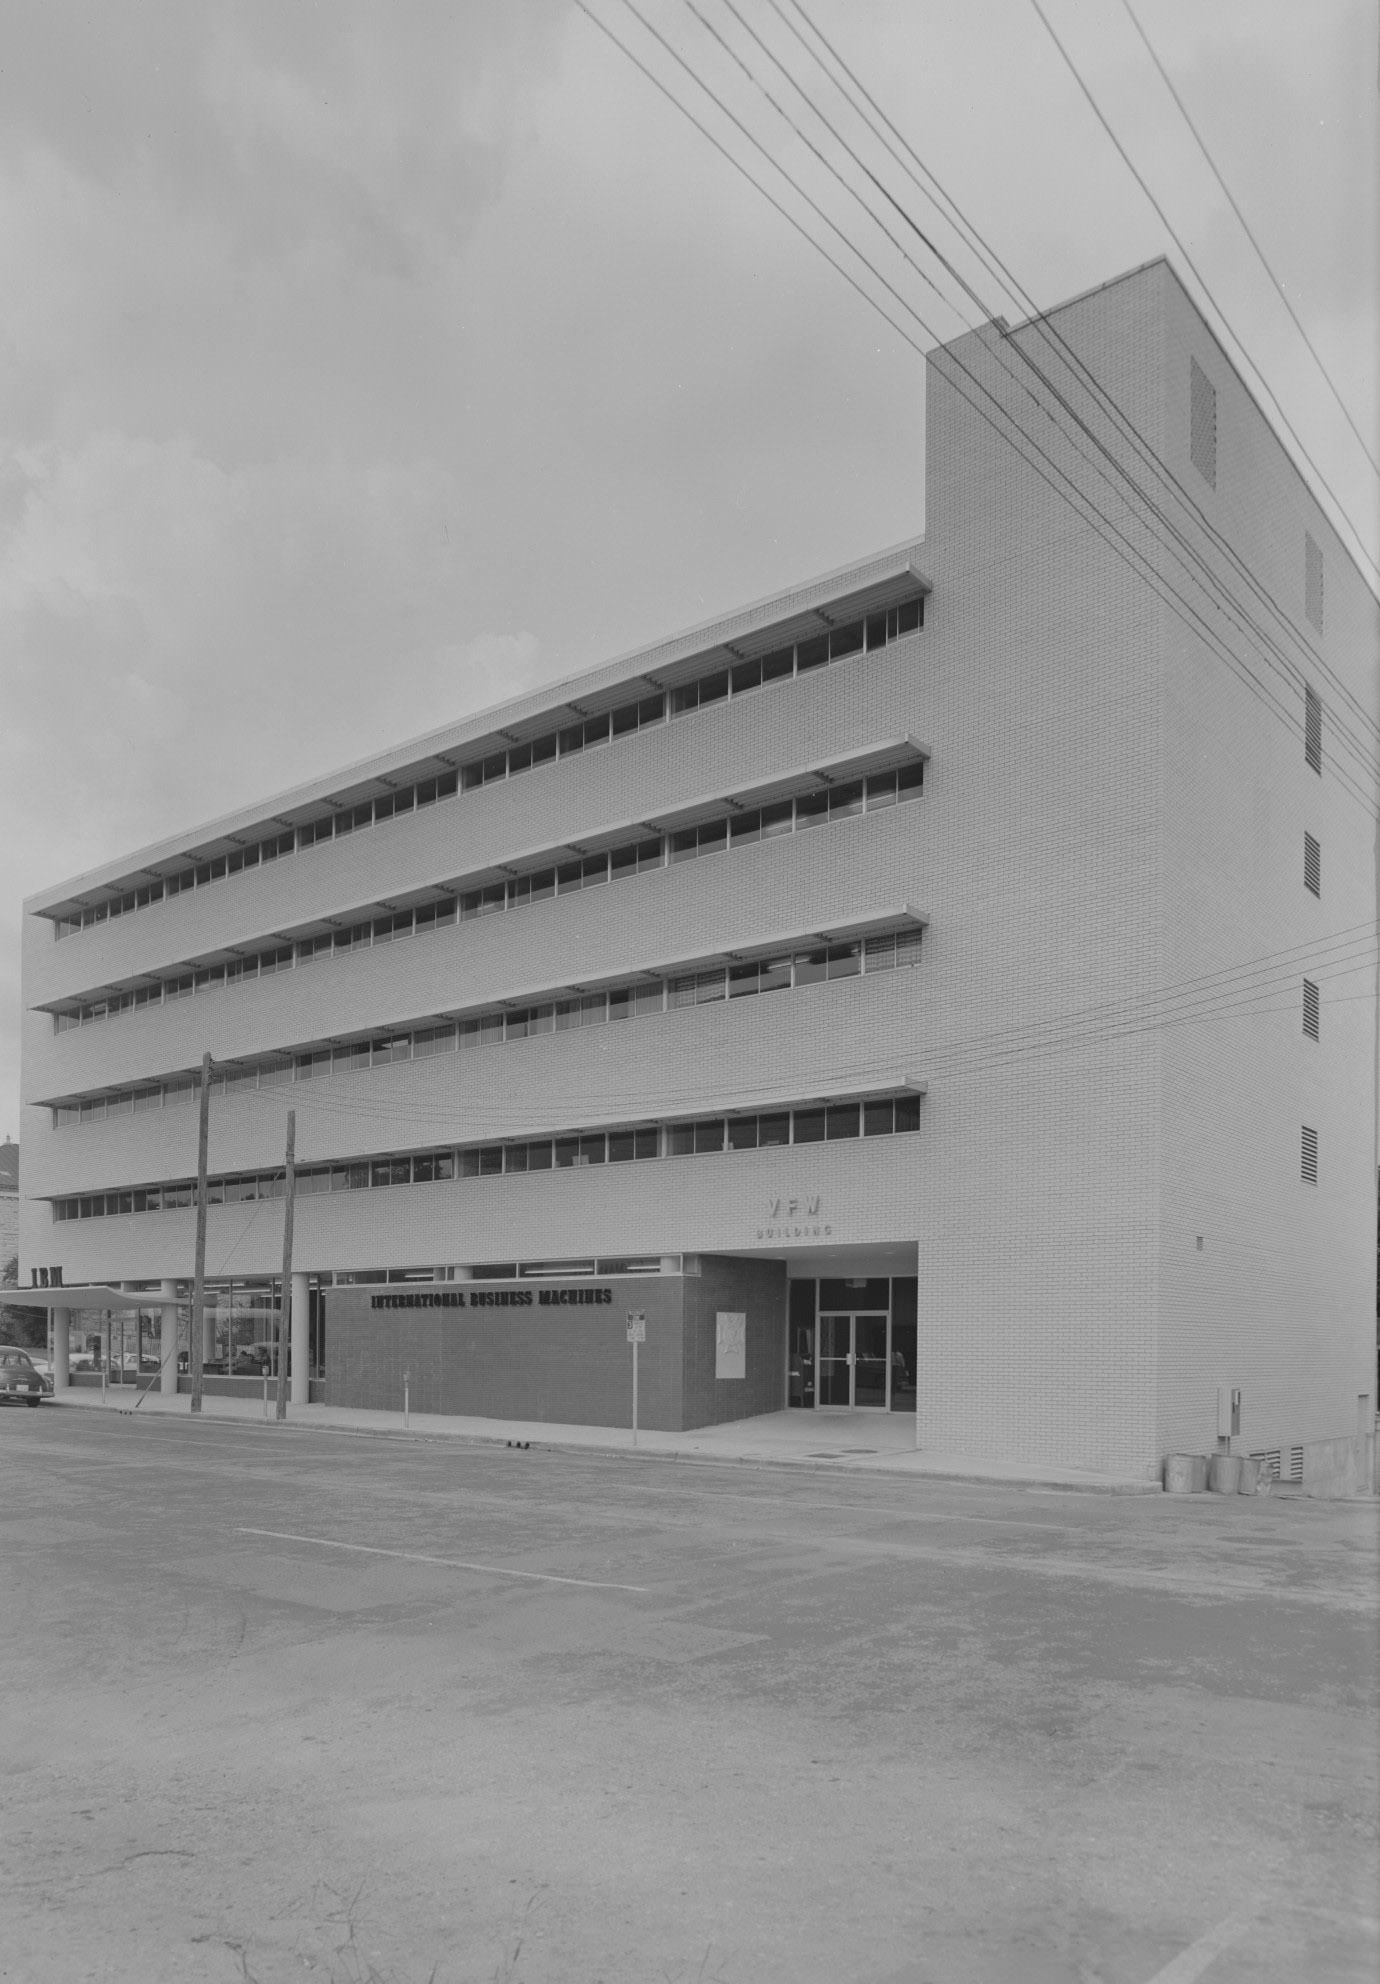 Exterior of VFW Building with IBM Signs, 1957.